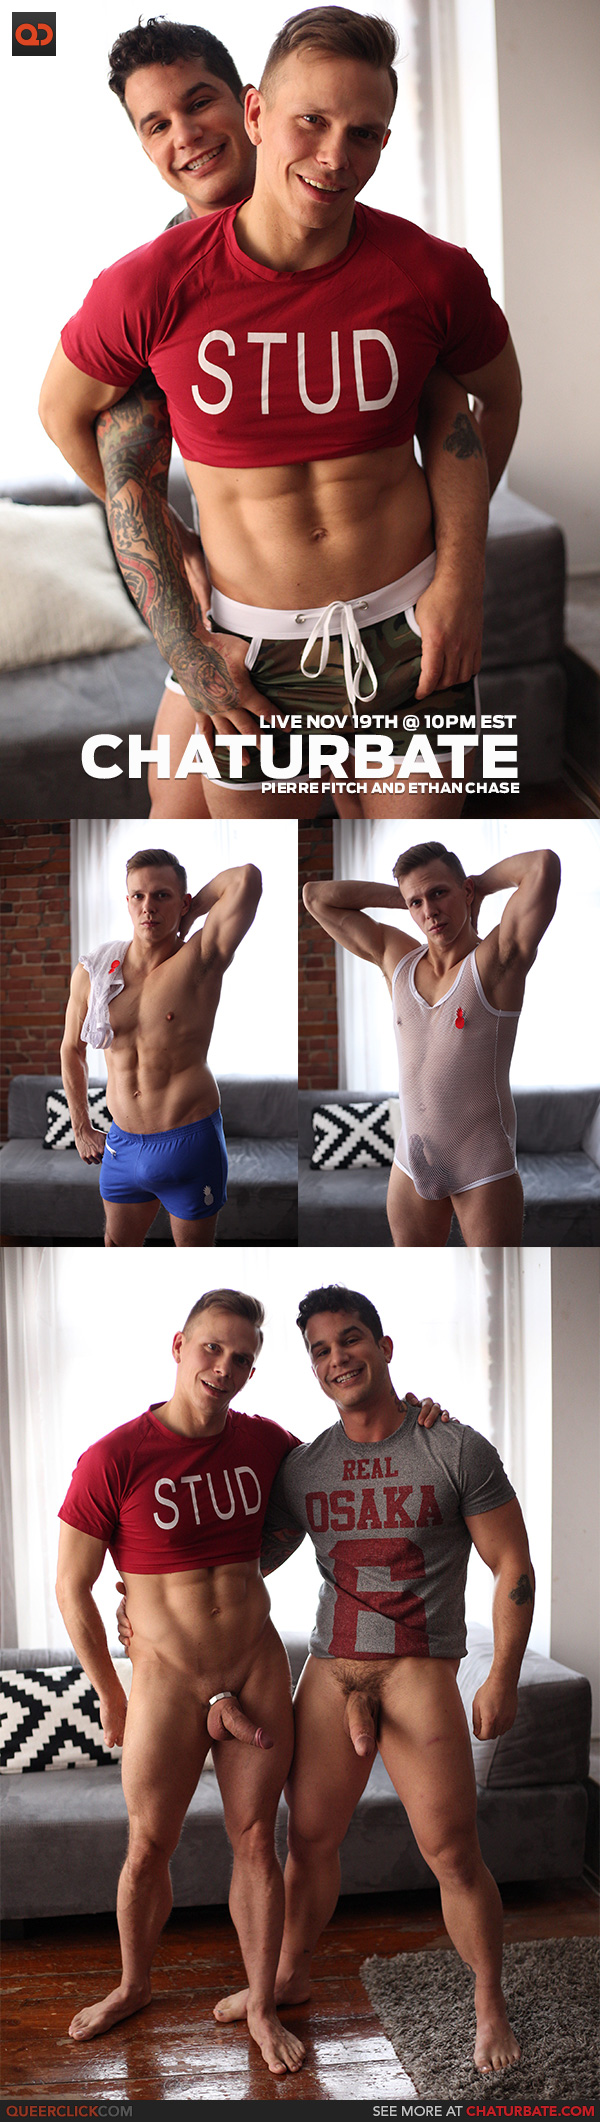 Pierre Fitch and Ethan Chase  - Chaturbate